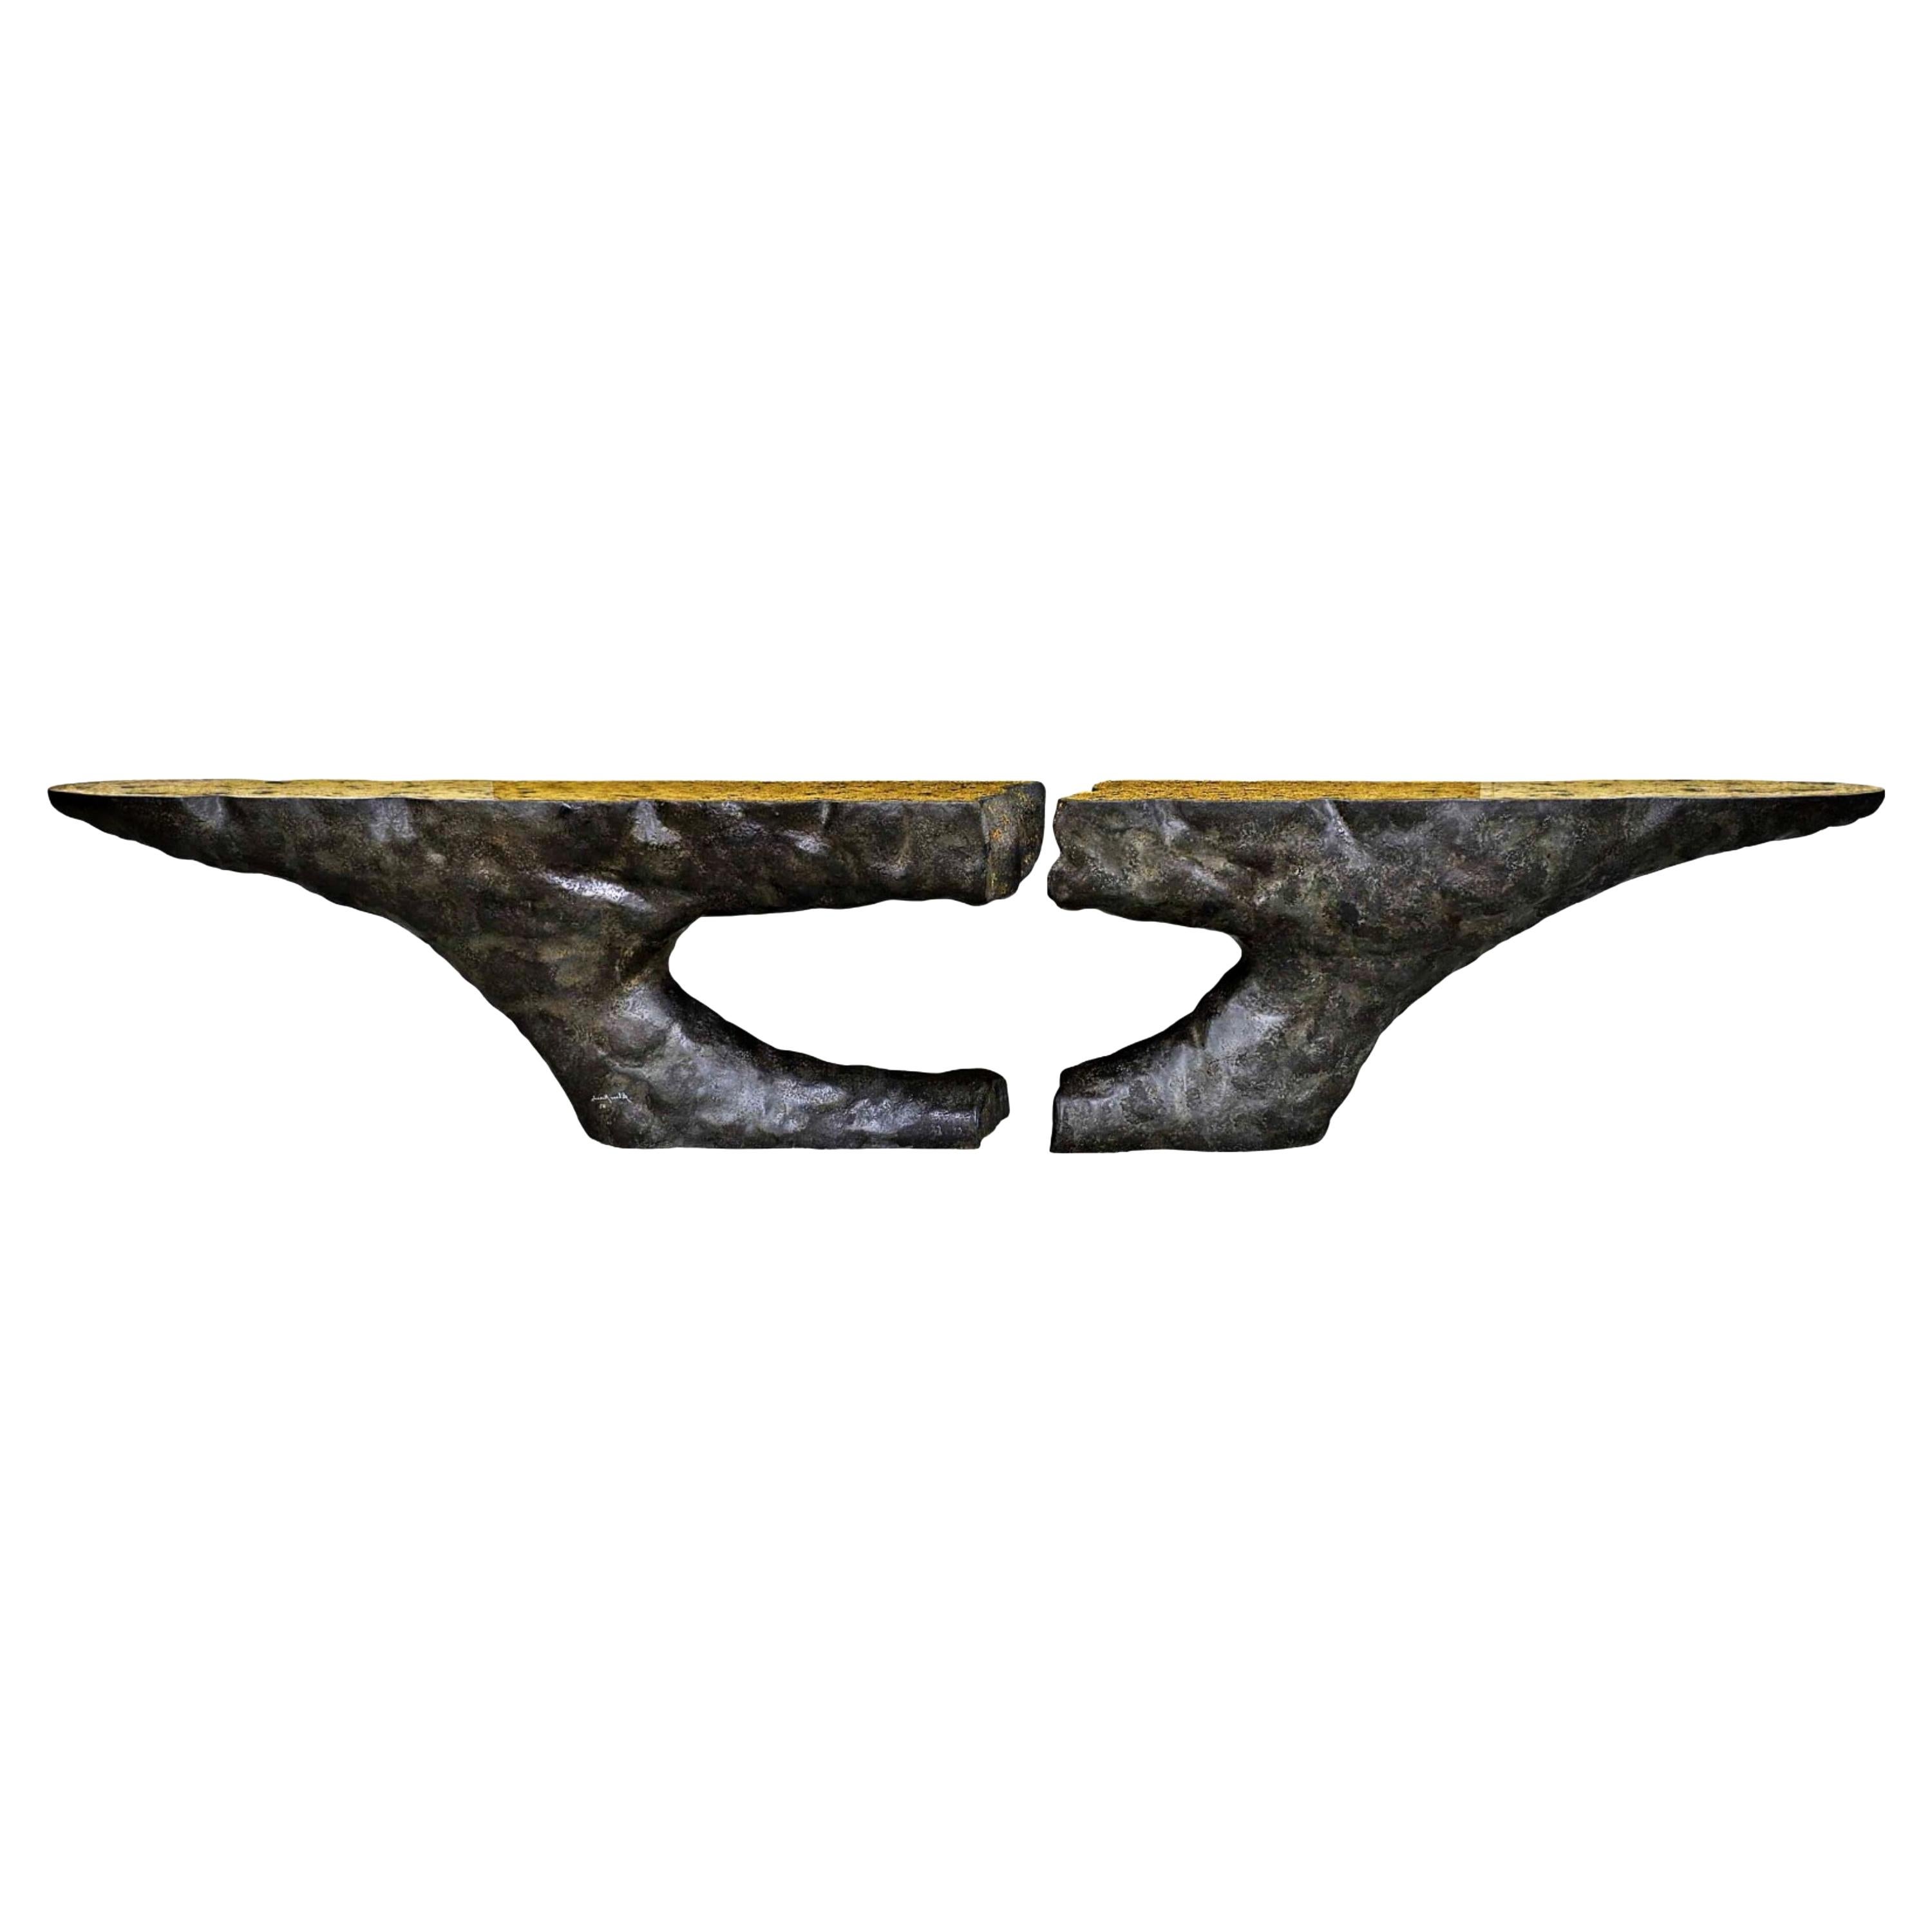 New Design Console in Resin Finished and Textured in "Vulcanic Rock"